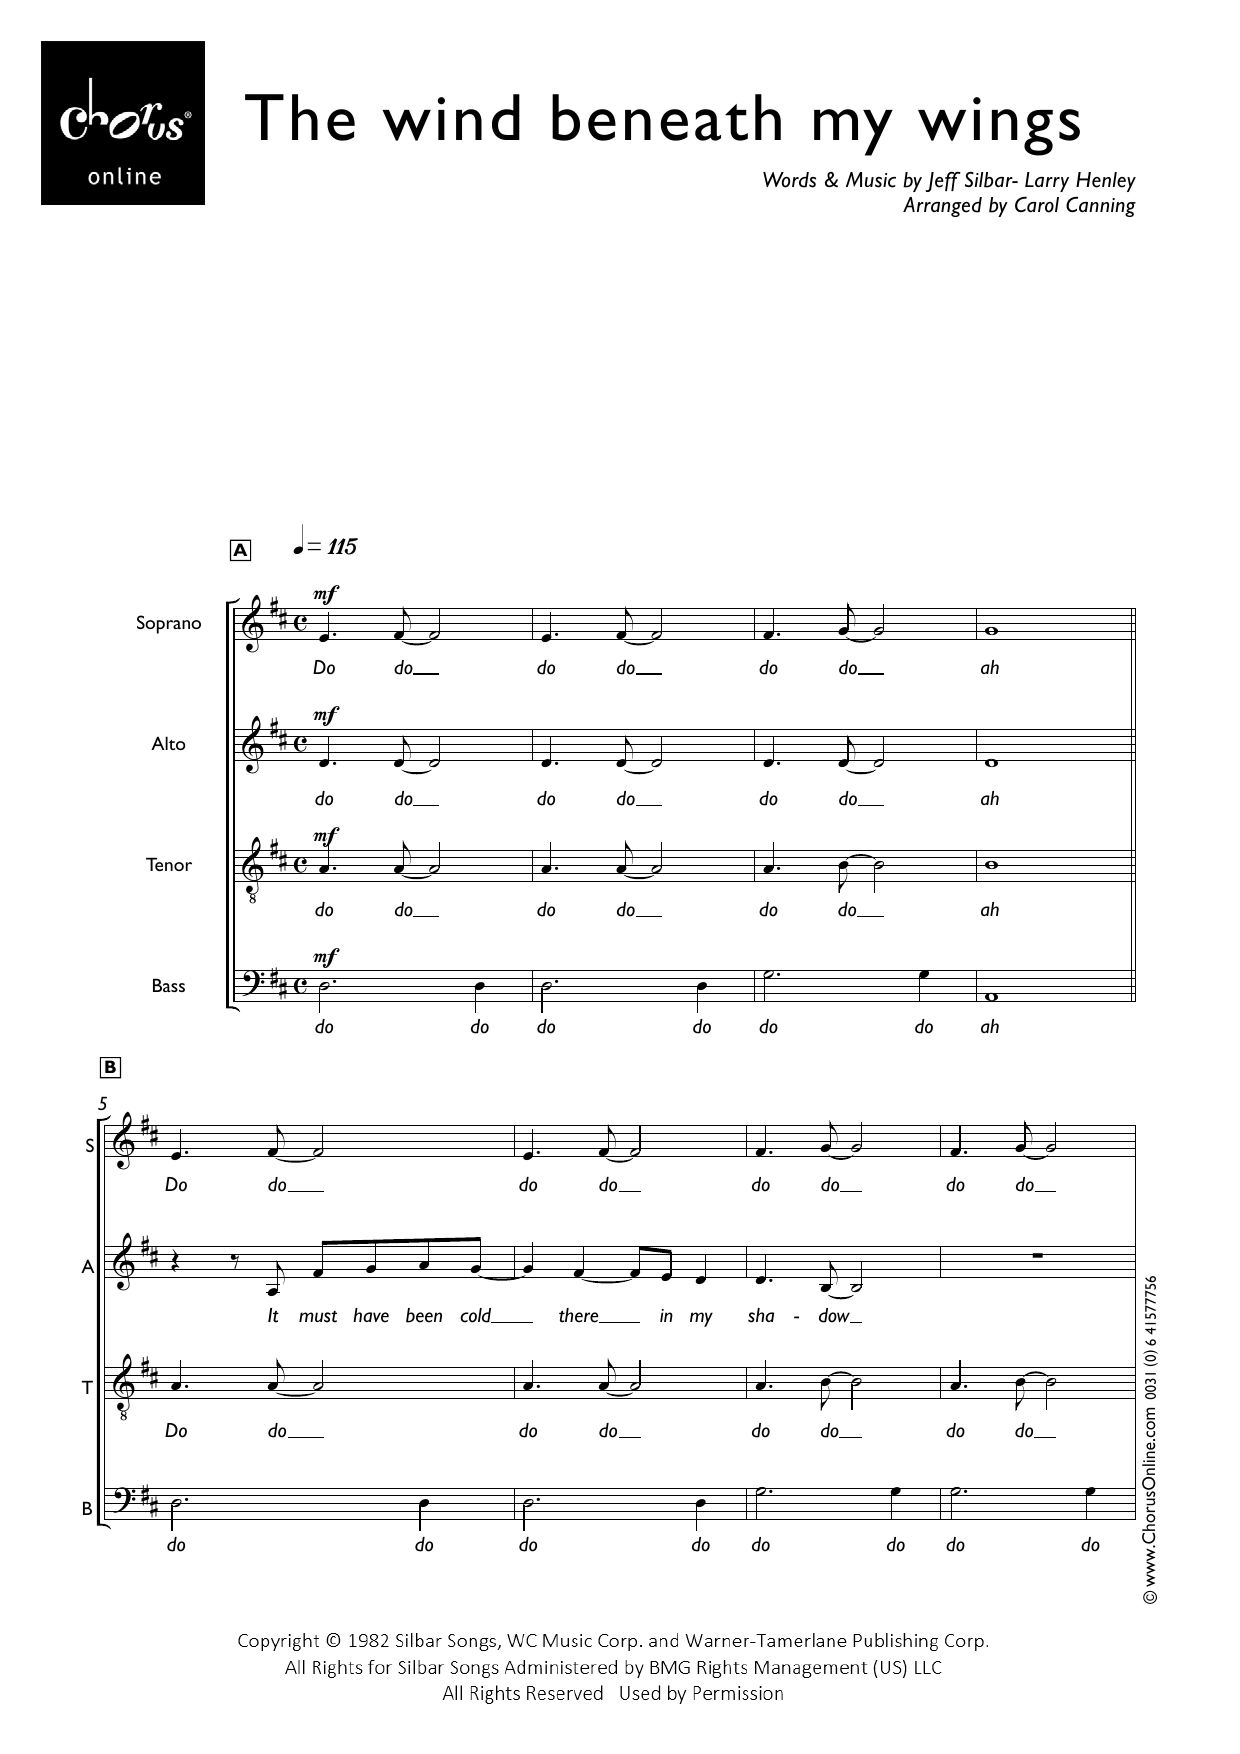 Bette Midler Wind Beneath My Wings (arr. Carol Canning) sheet music notes printable PDF score